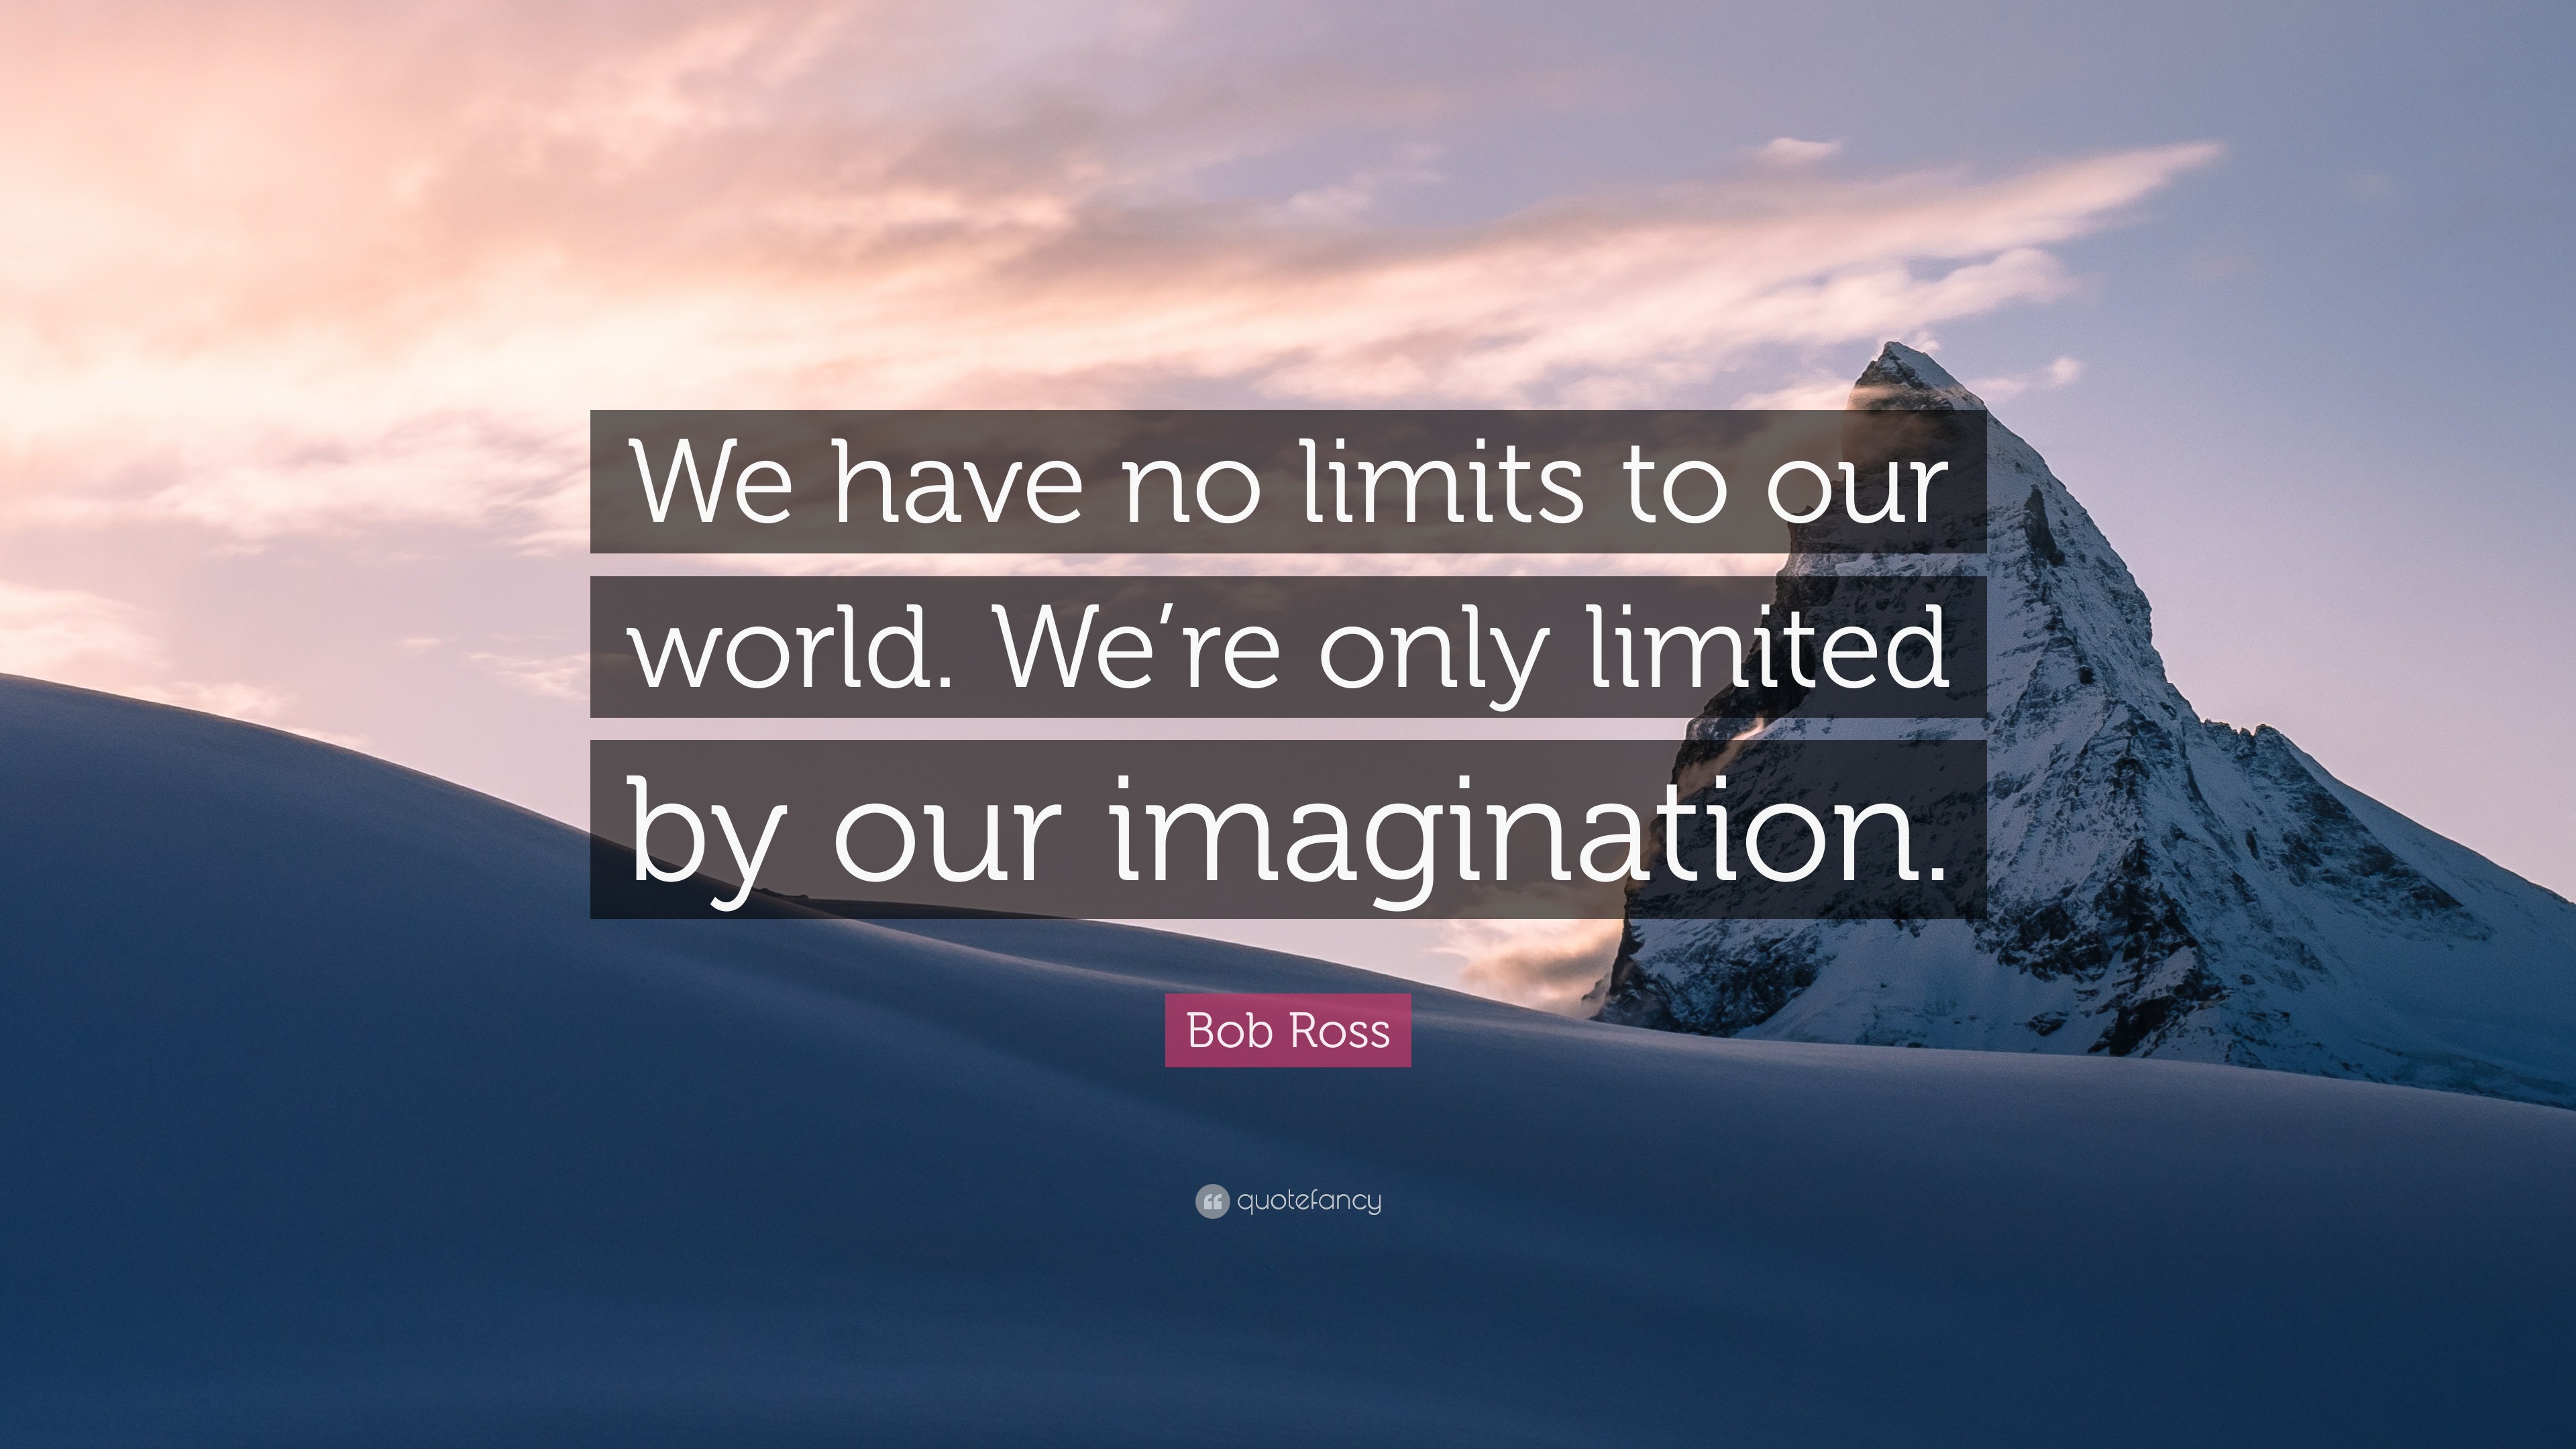 Bob Ross Quote: “We have no limits to our world. We’re only limited by